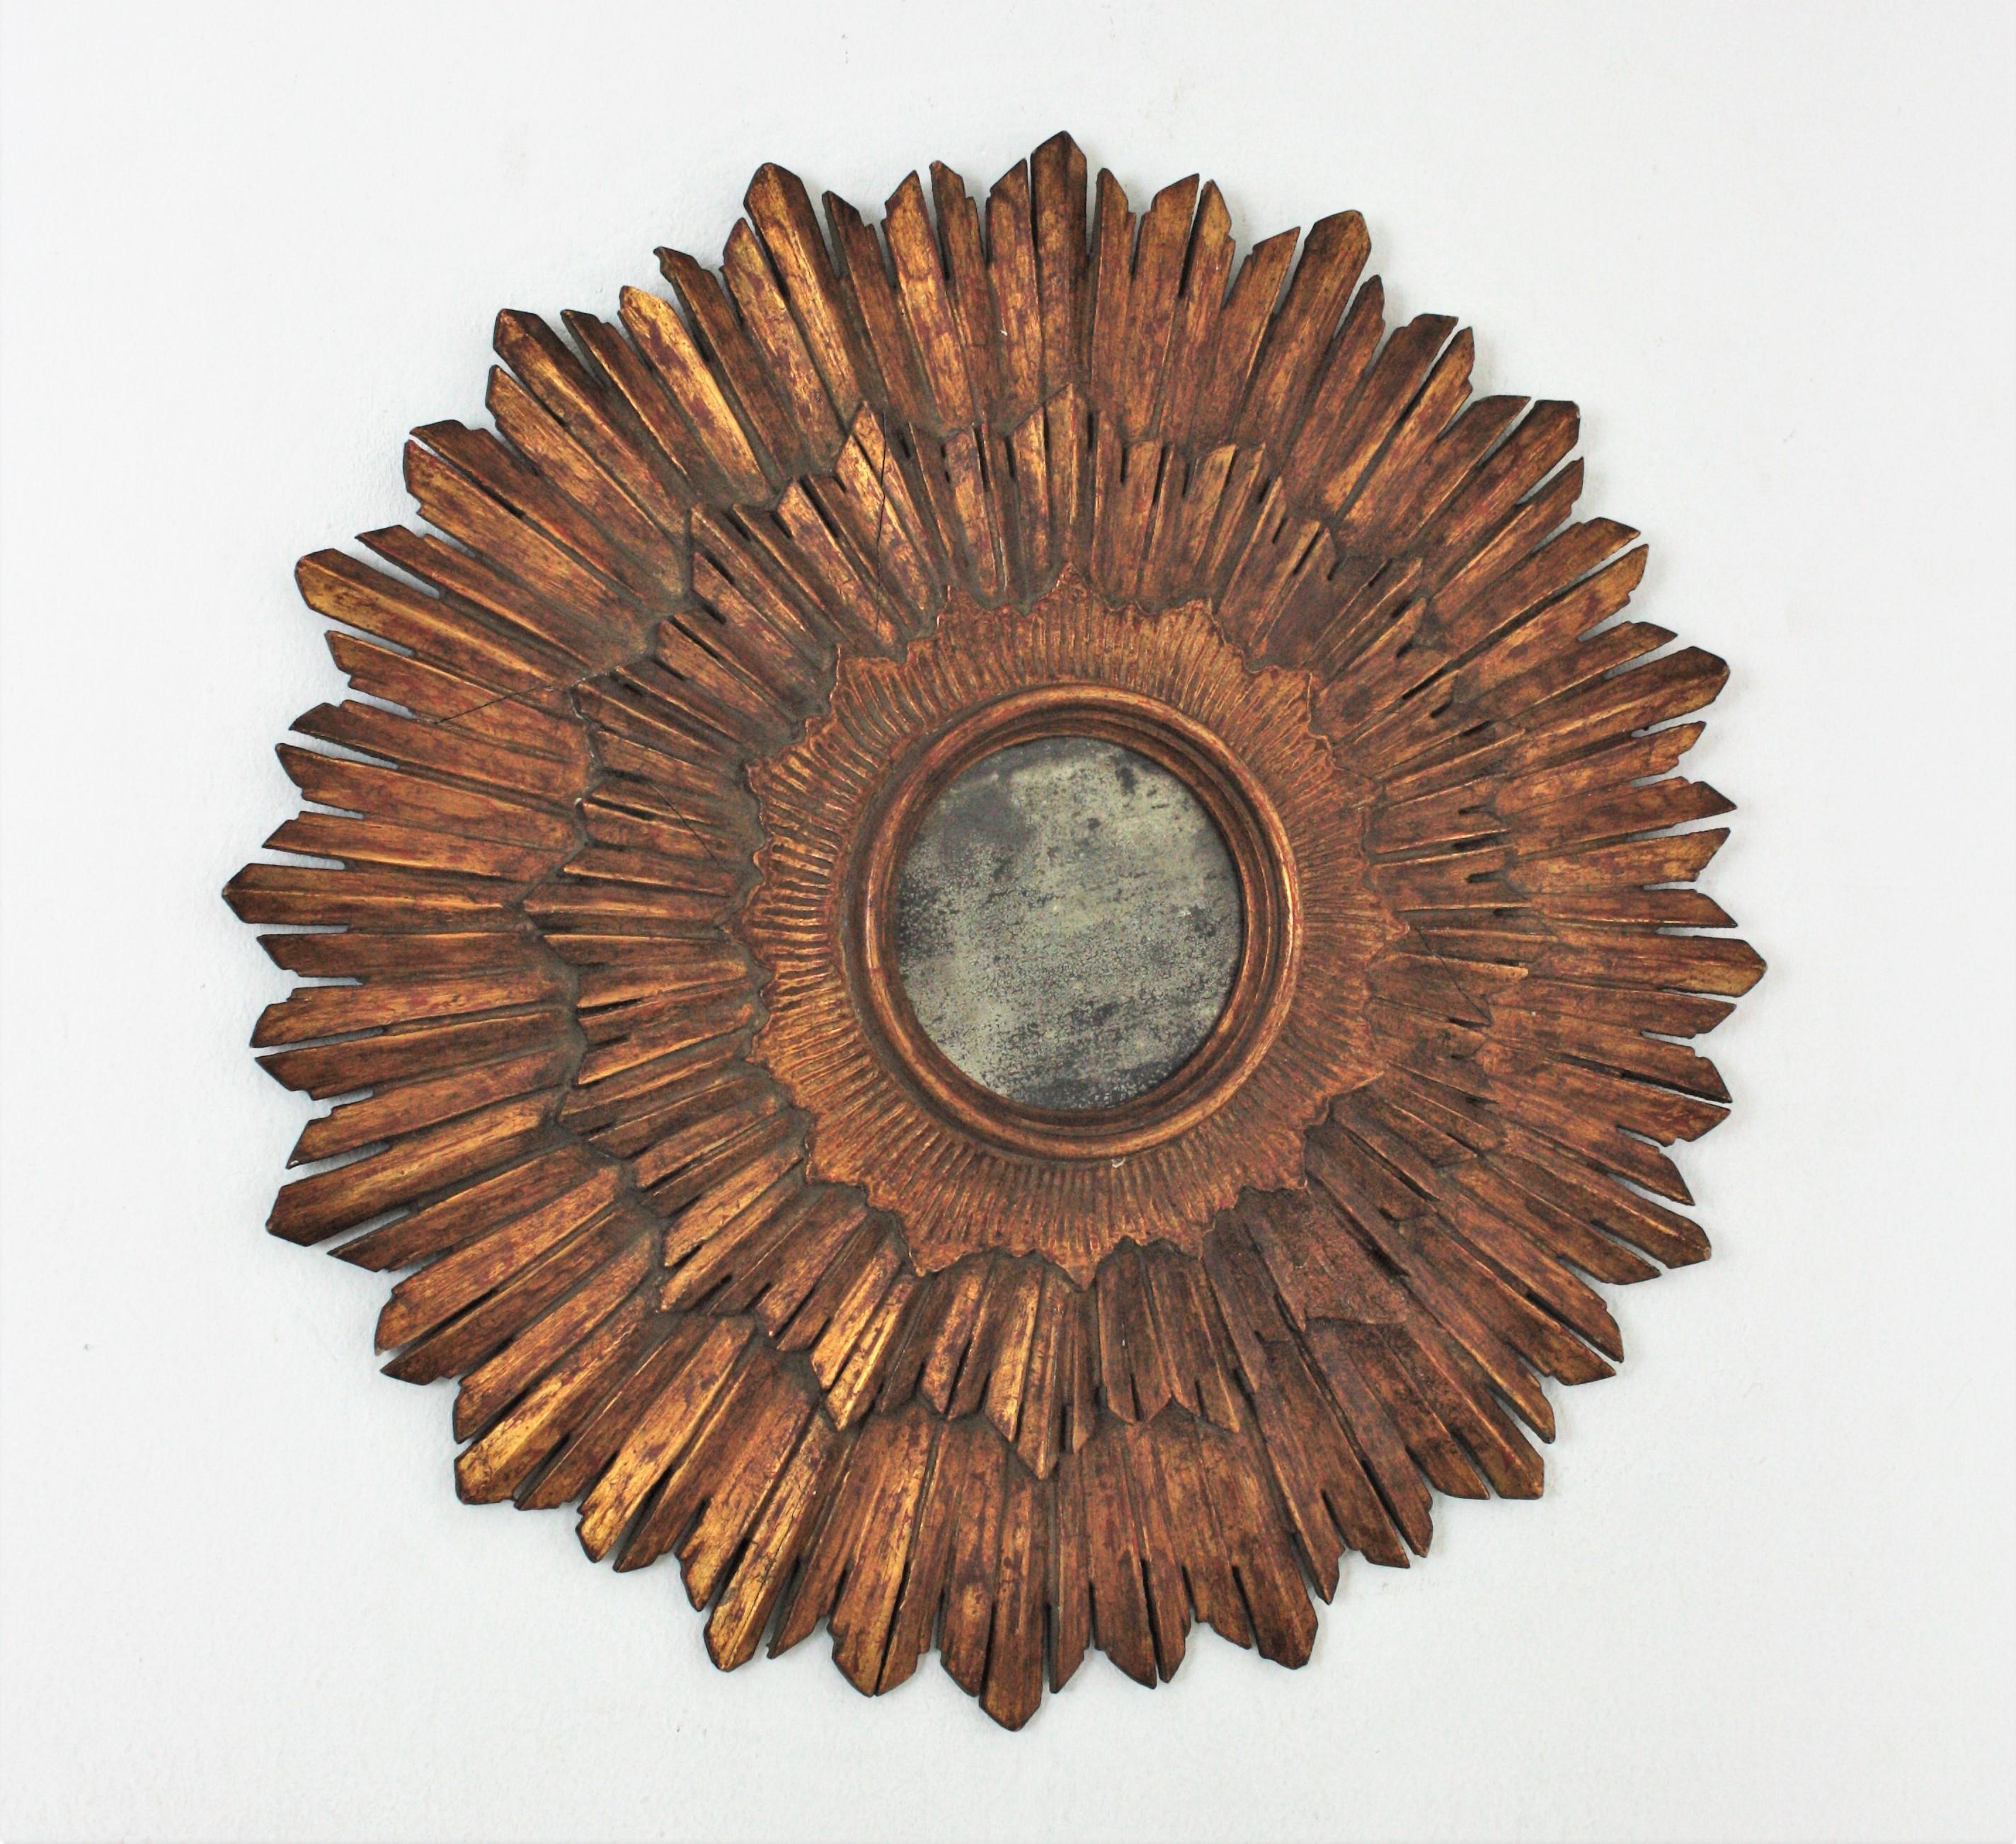 Triple Layered carved wood sunburst mirror, Spain, 1930s.
The three layers of rays surounding the central round glass highlight its beauty. 
This wall mirror has a terrific aged patina showing its original gold leaf gilding and wearing its antique